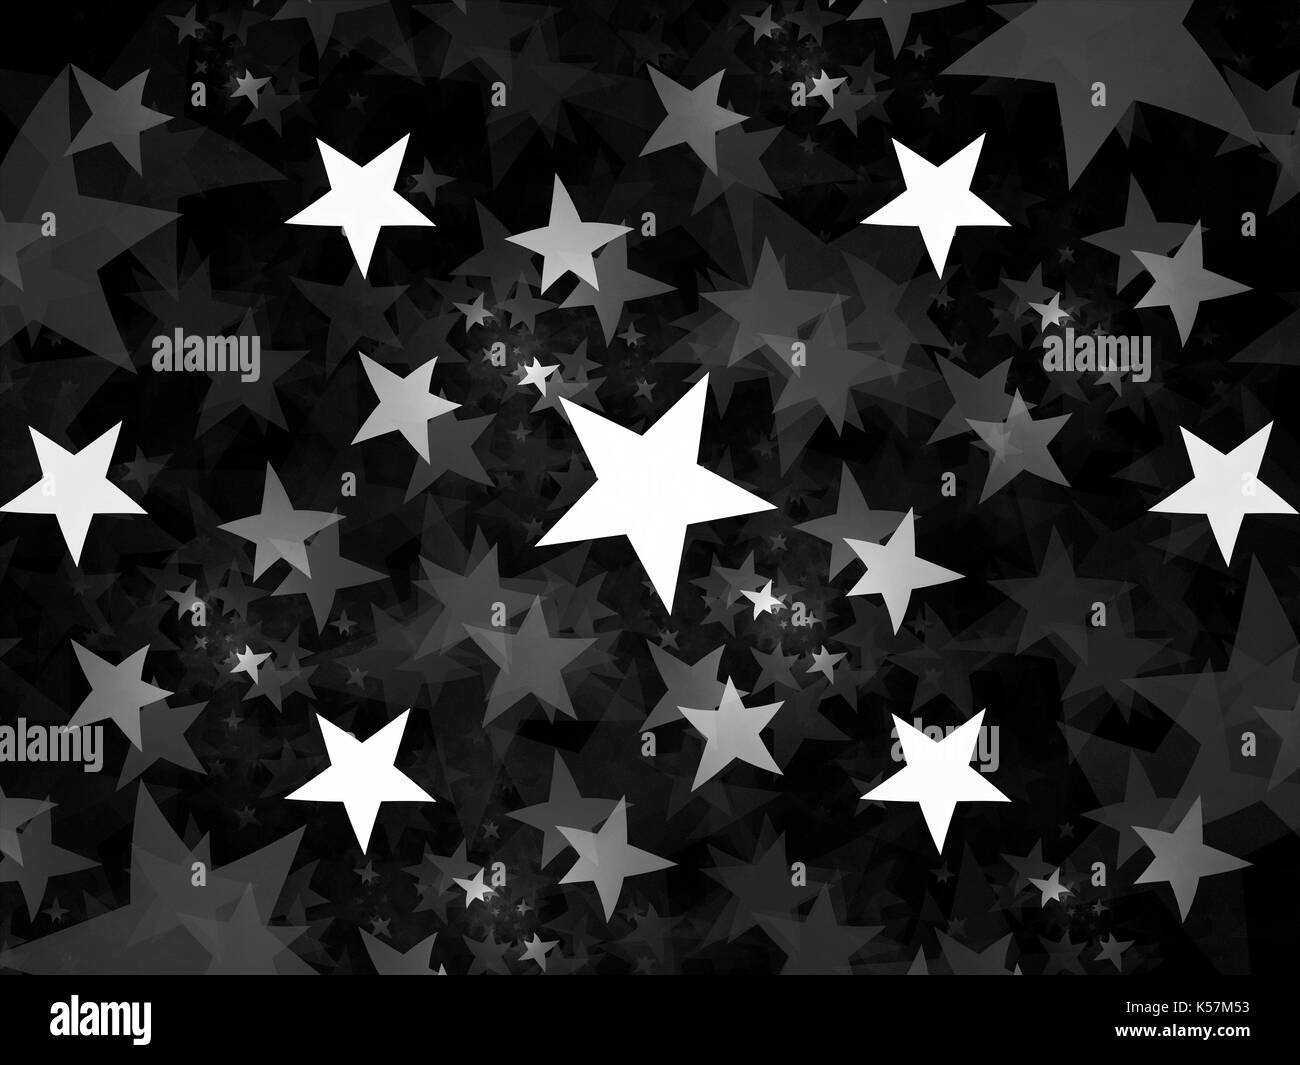 Computer generated shining stars abstract fractal background, black and white texture, 3D rendering Stock Photo